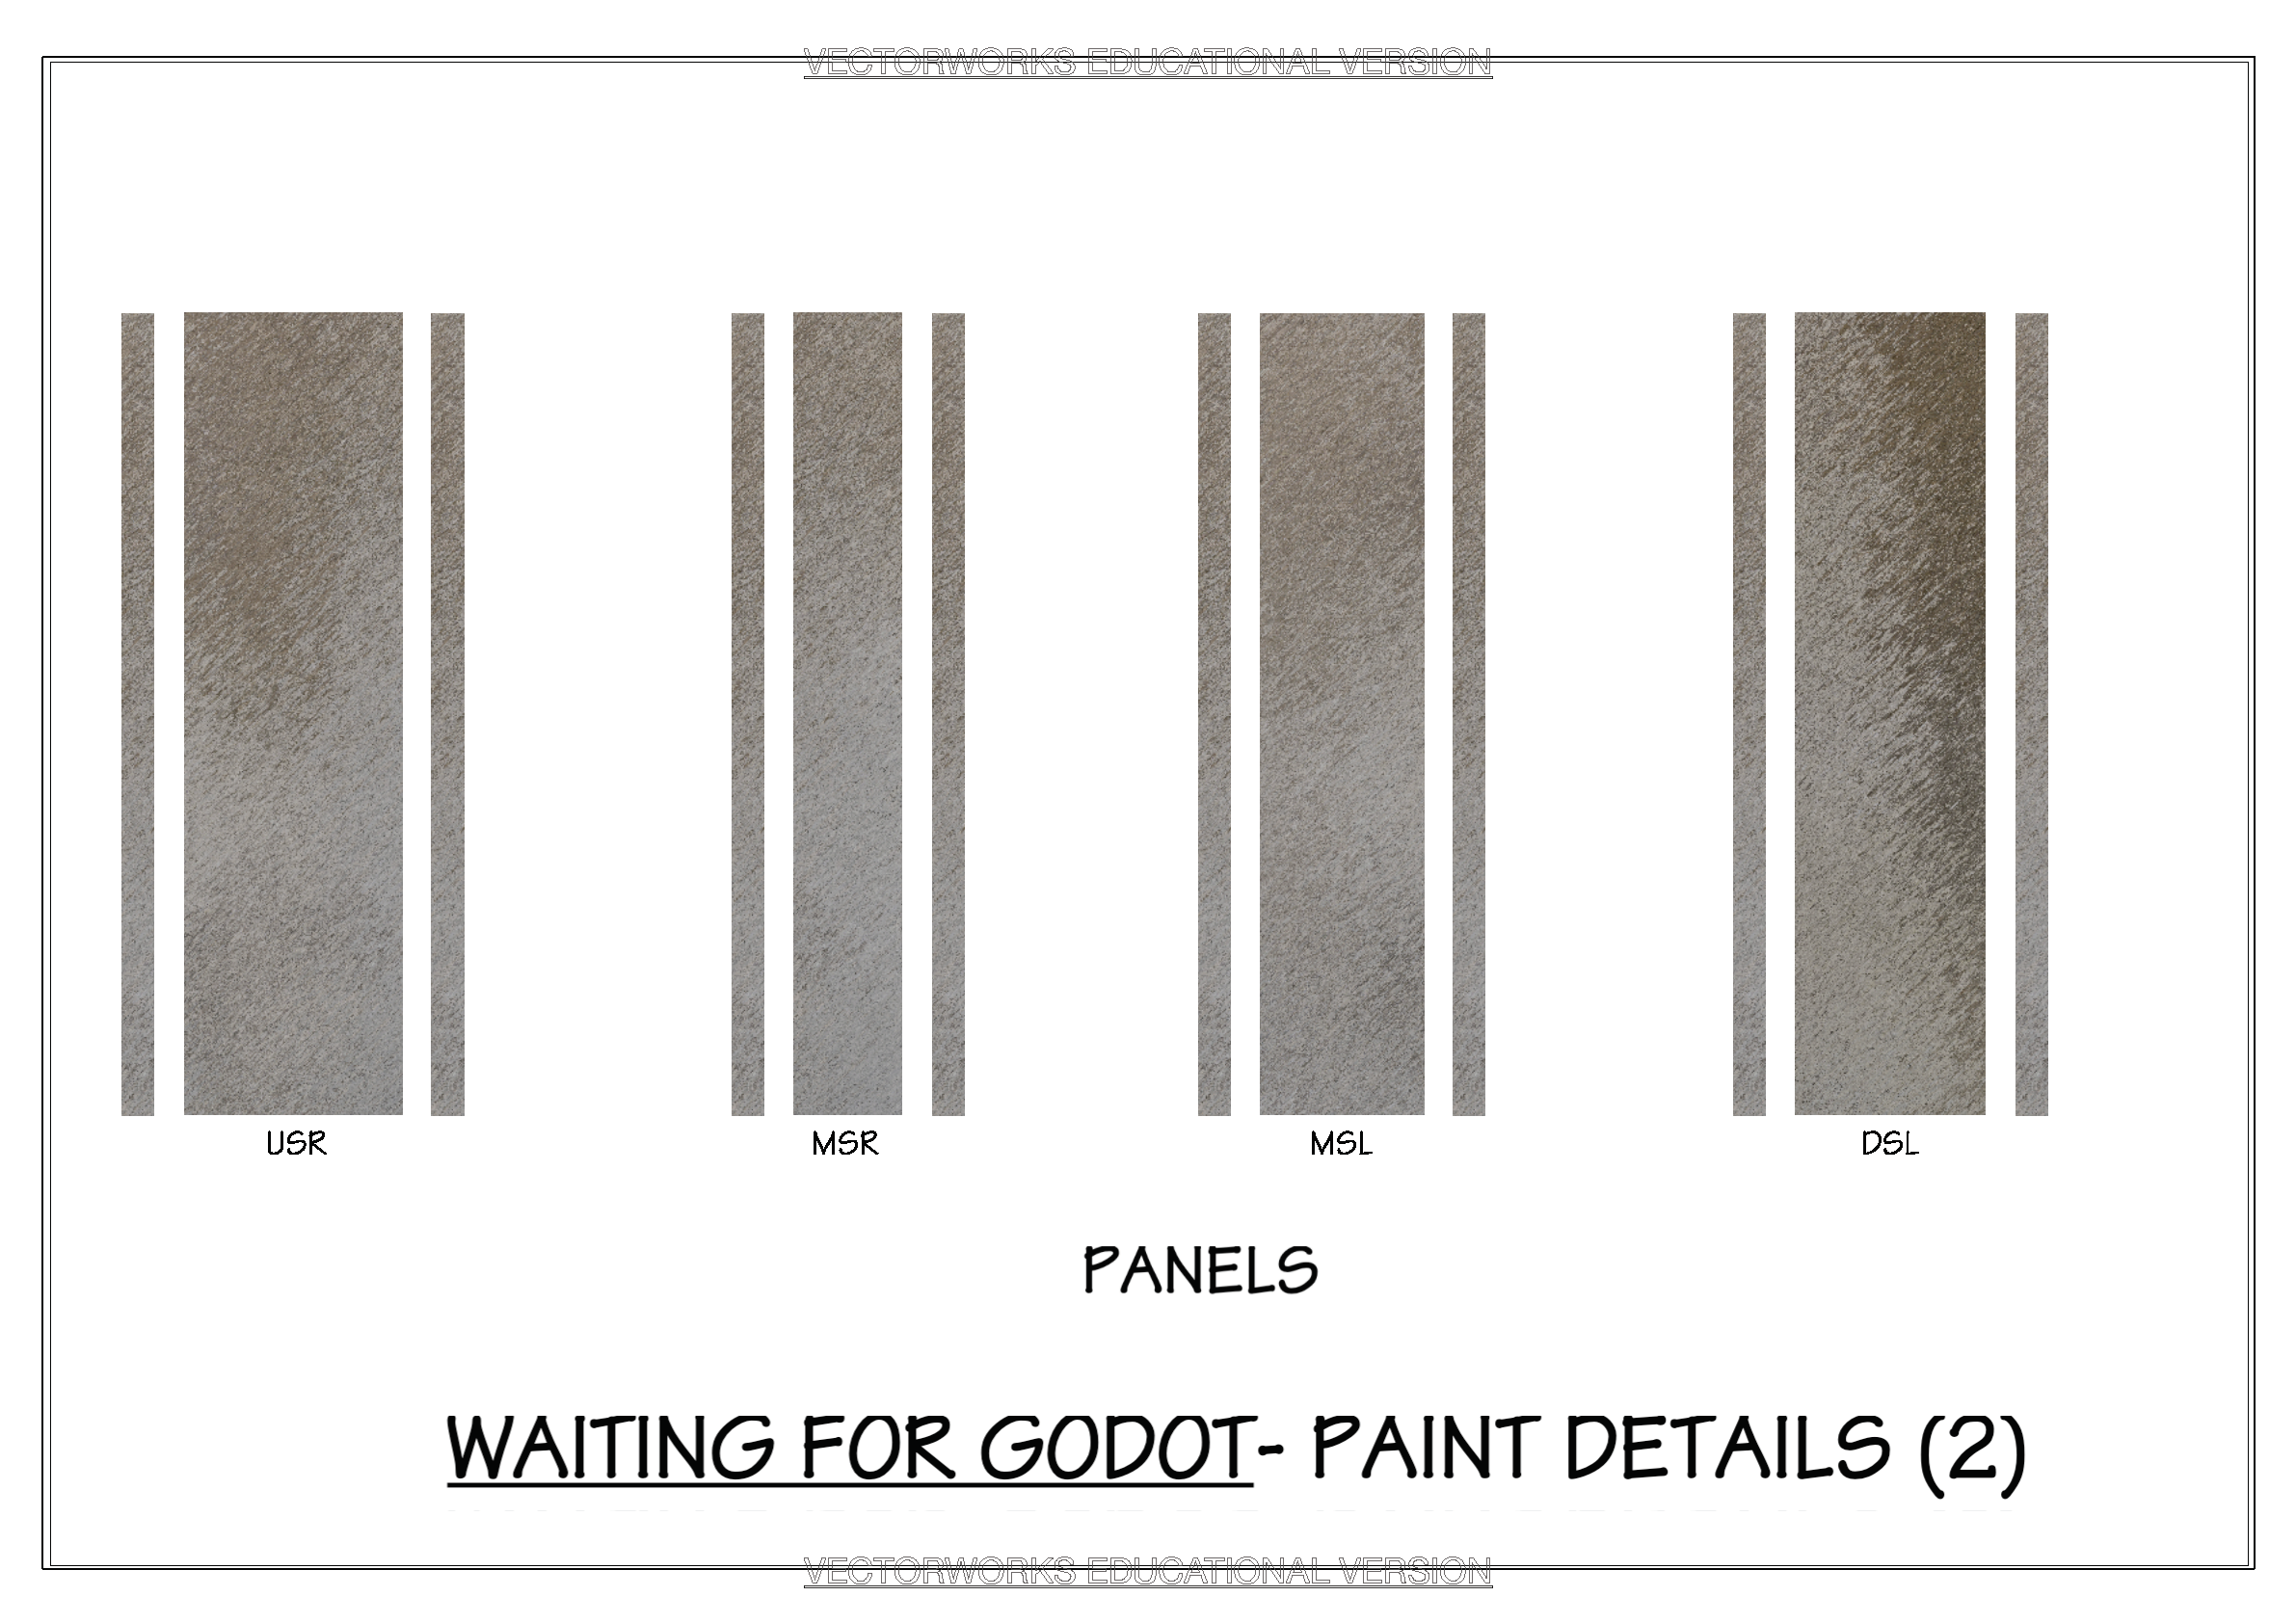 Waiting for Godot- Selected paint details